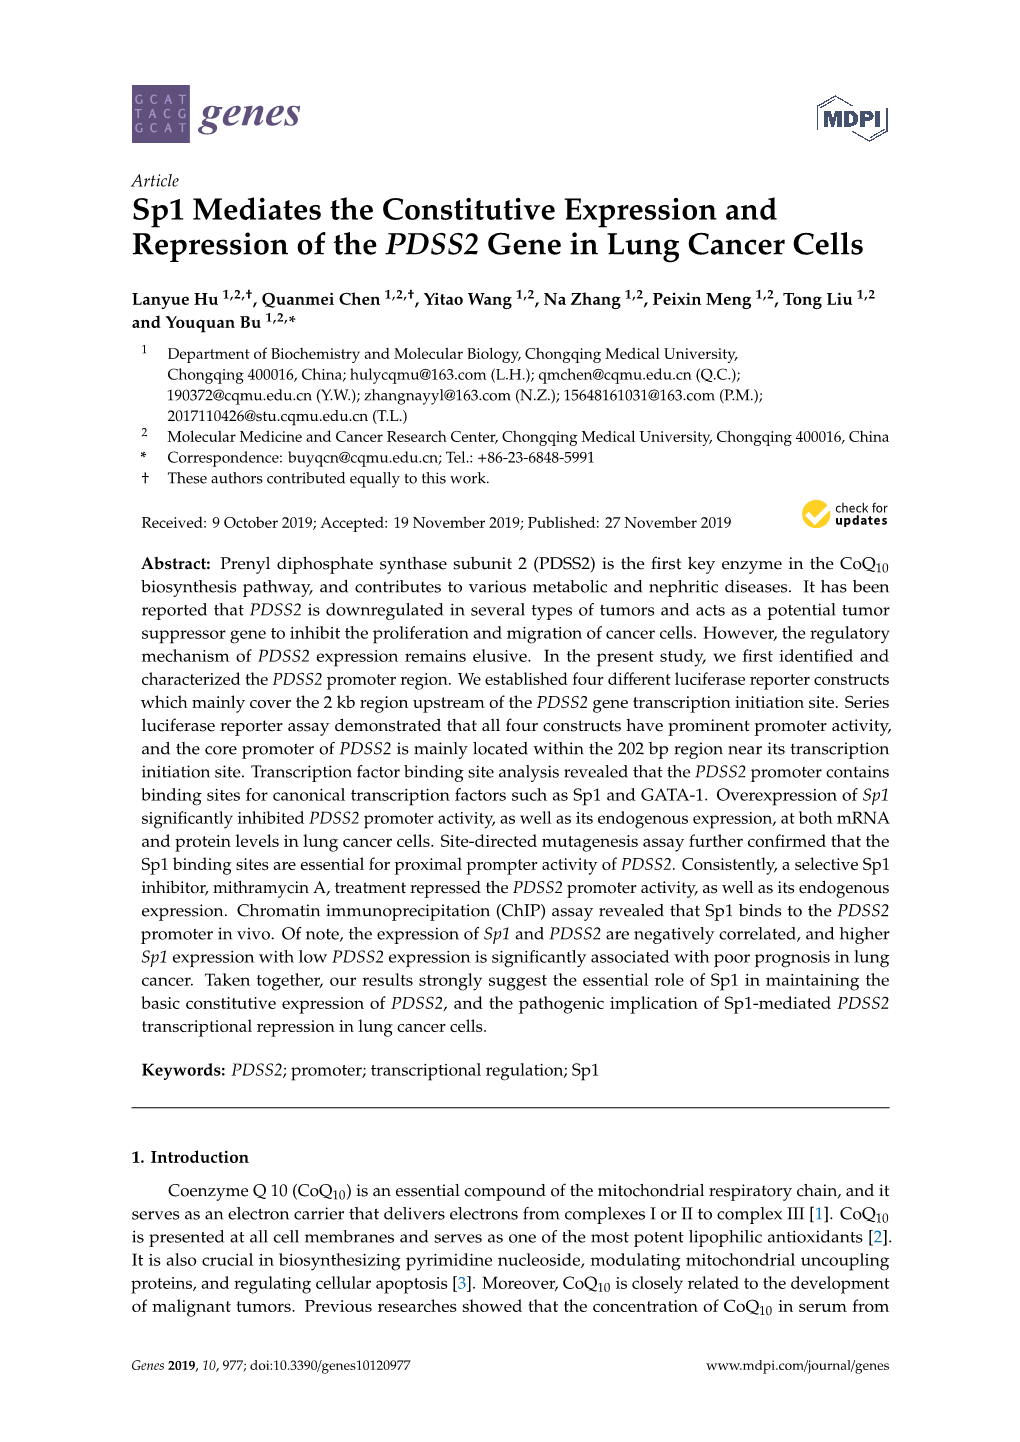 Sp1 Mediates the Constitutive Expression and Repression of the PDSS2 Gene in Lung Cancer Cells